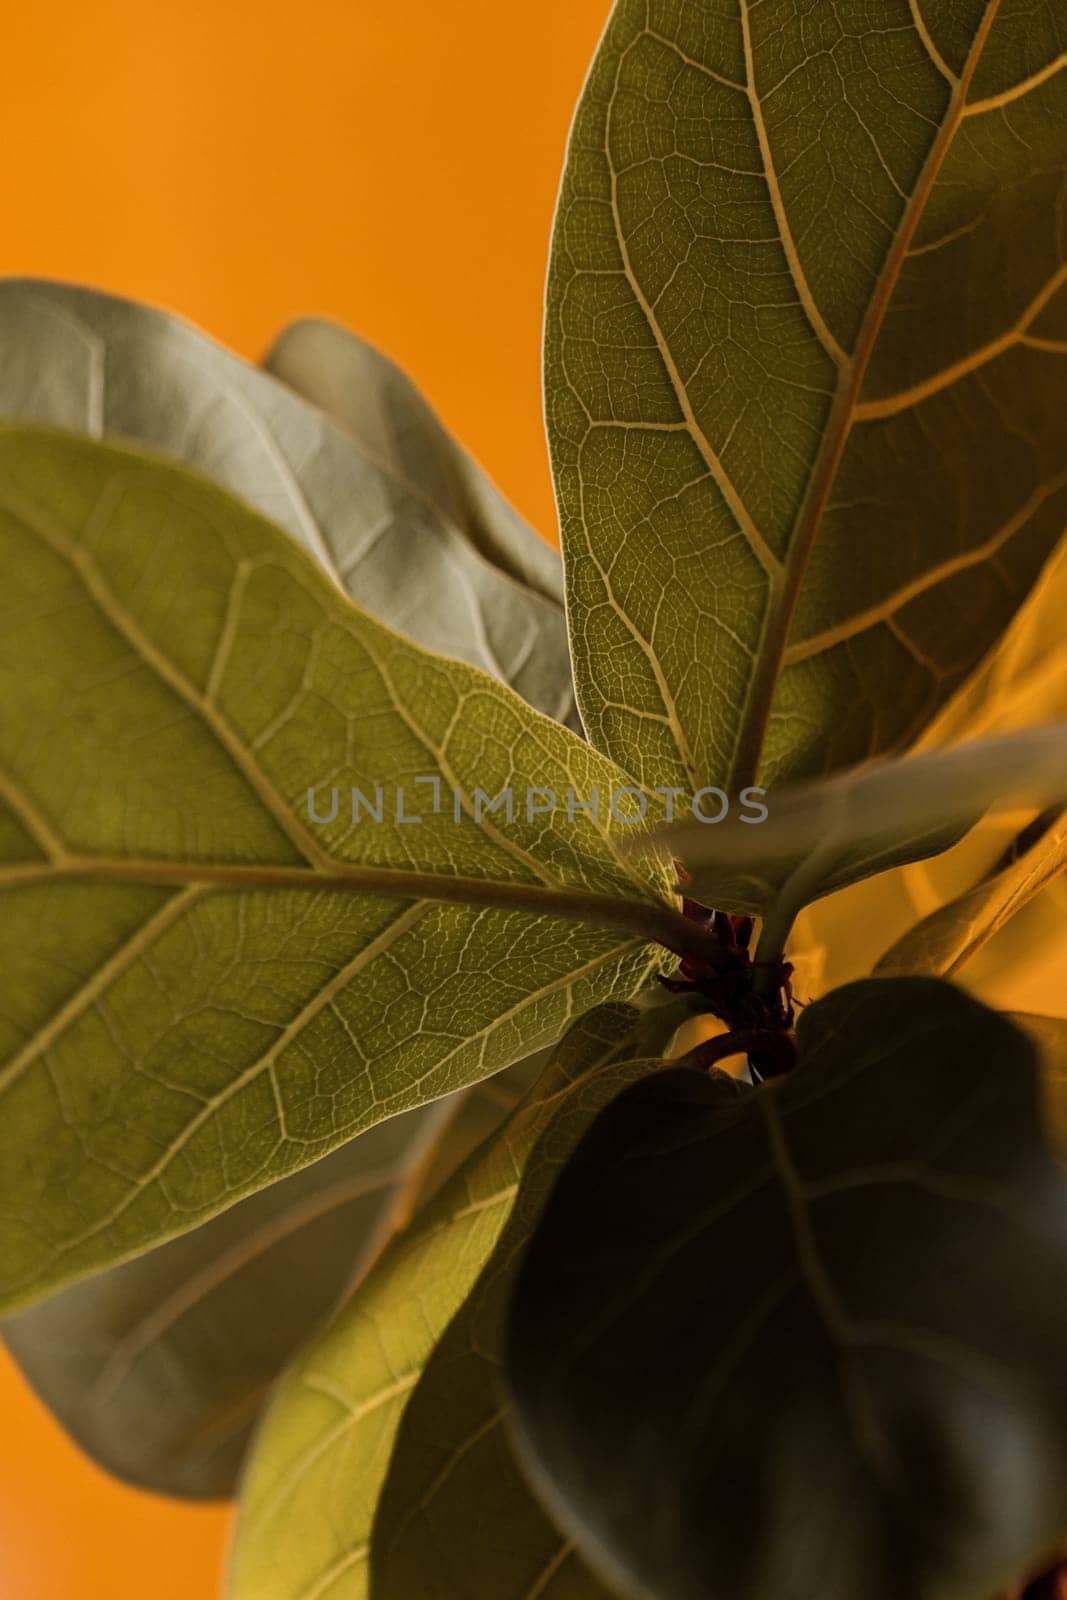 A Close Up Of A Plant 's Leaves On An Orange Background by apavlin